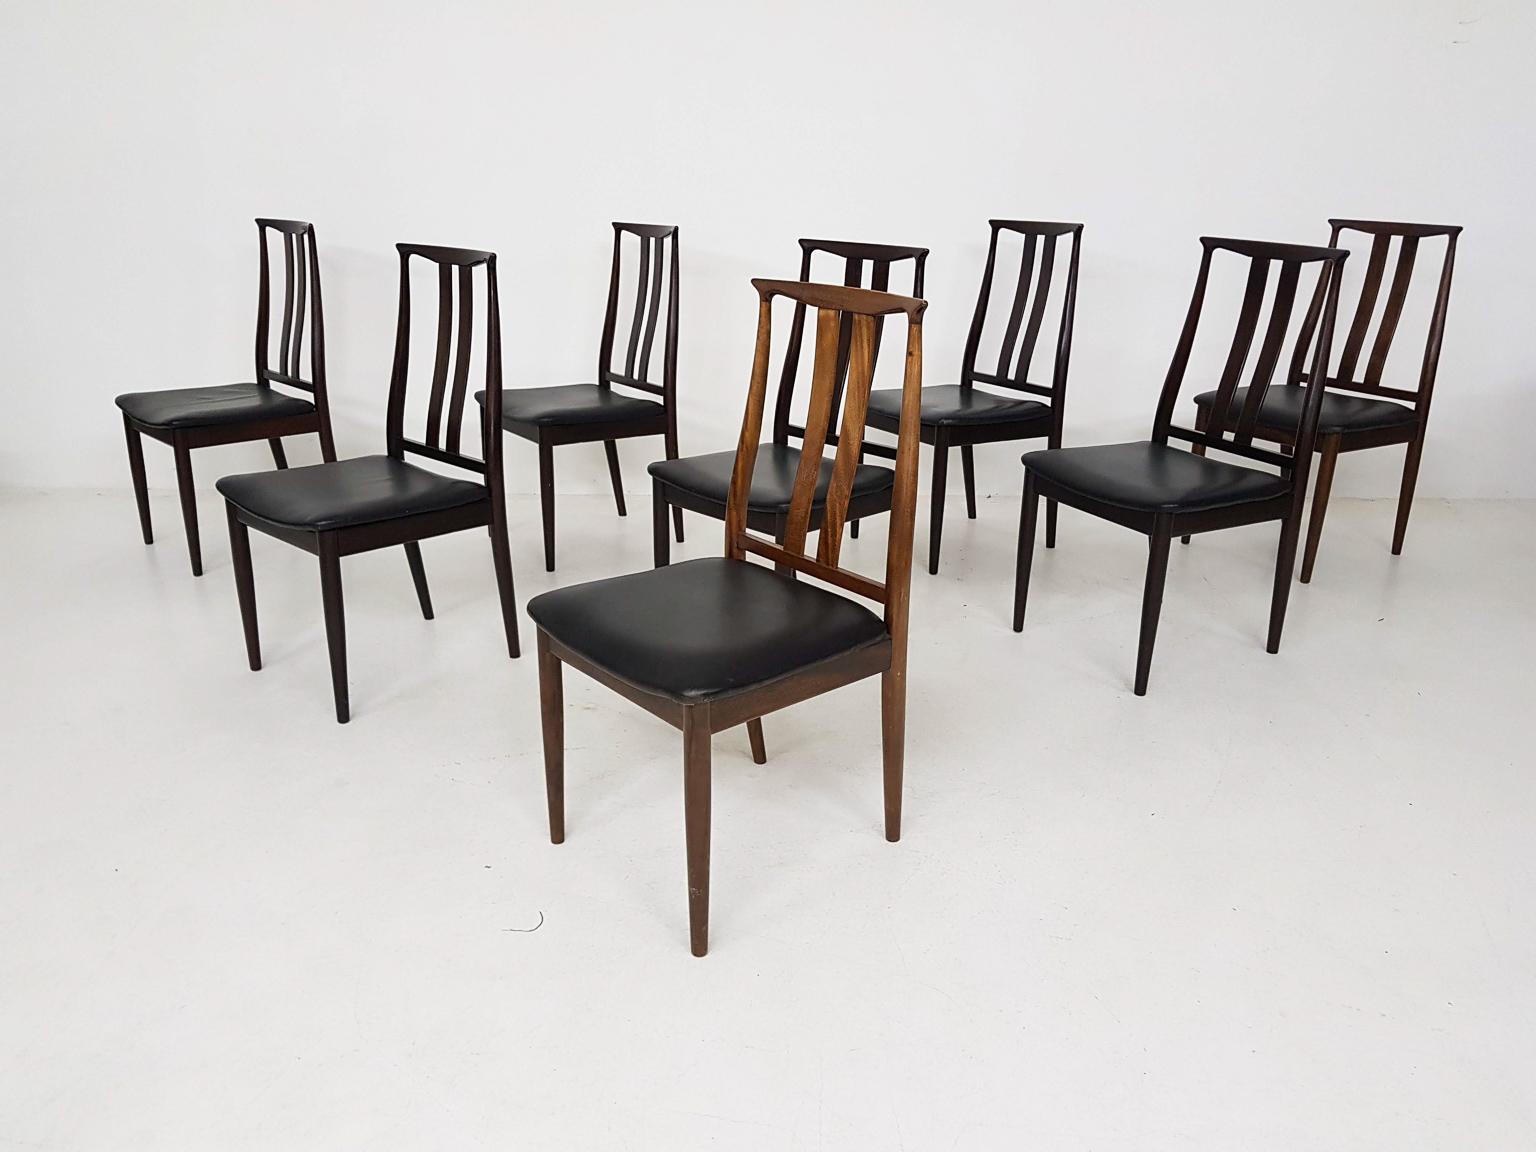 Set of 8 dining chairs in rosewood made by Danish Overseas Furniture in the 1960s. 

It was in the 1960s Danish design became increasingly popular in overseas countries. Therefore several production facilities were created at strategic places for